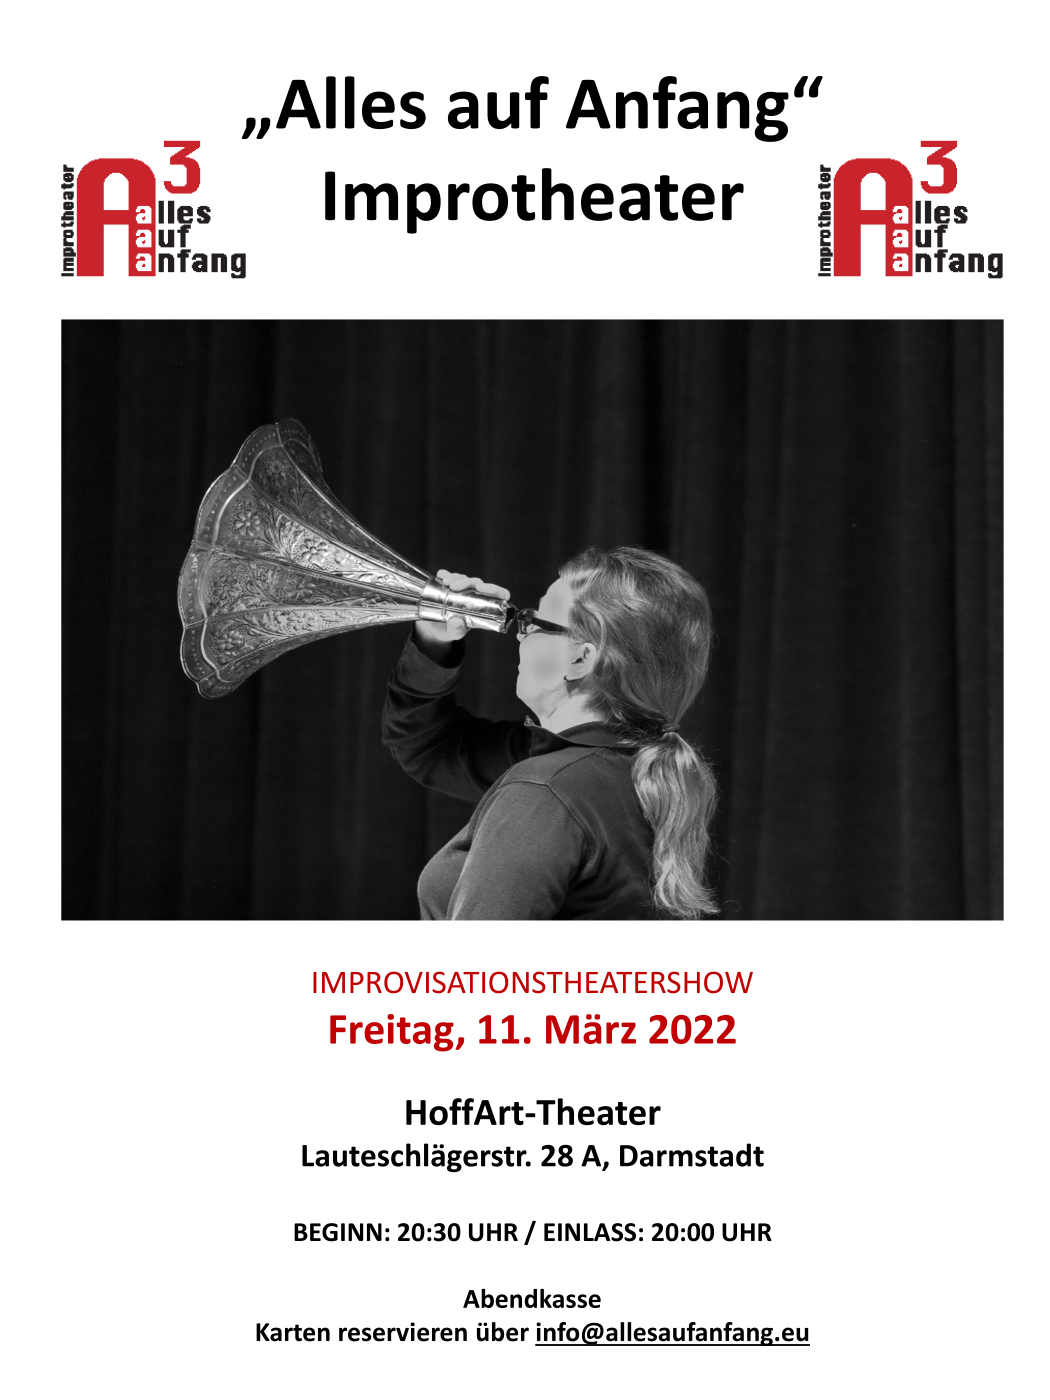 Alles auf Anfang – Improtheatershow